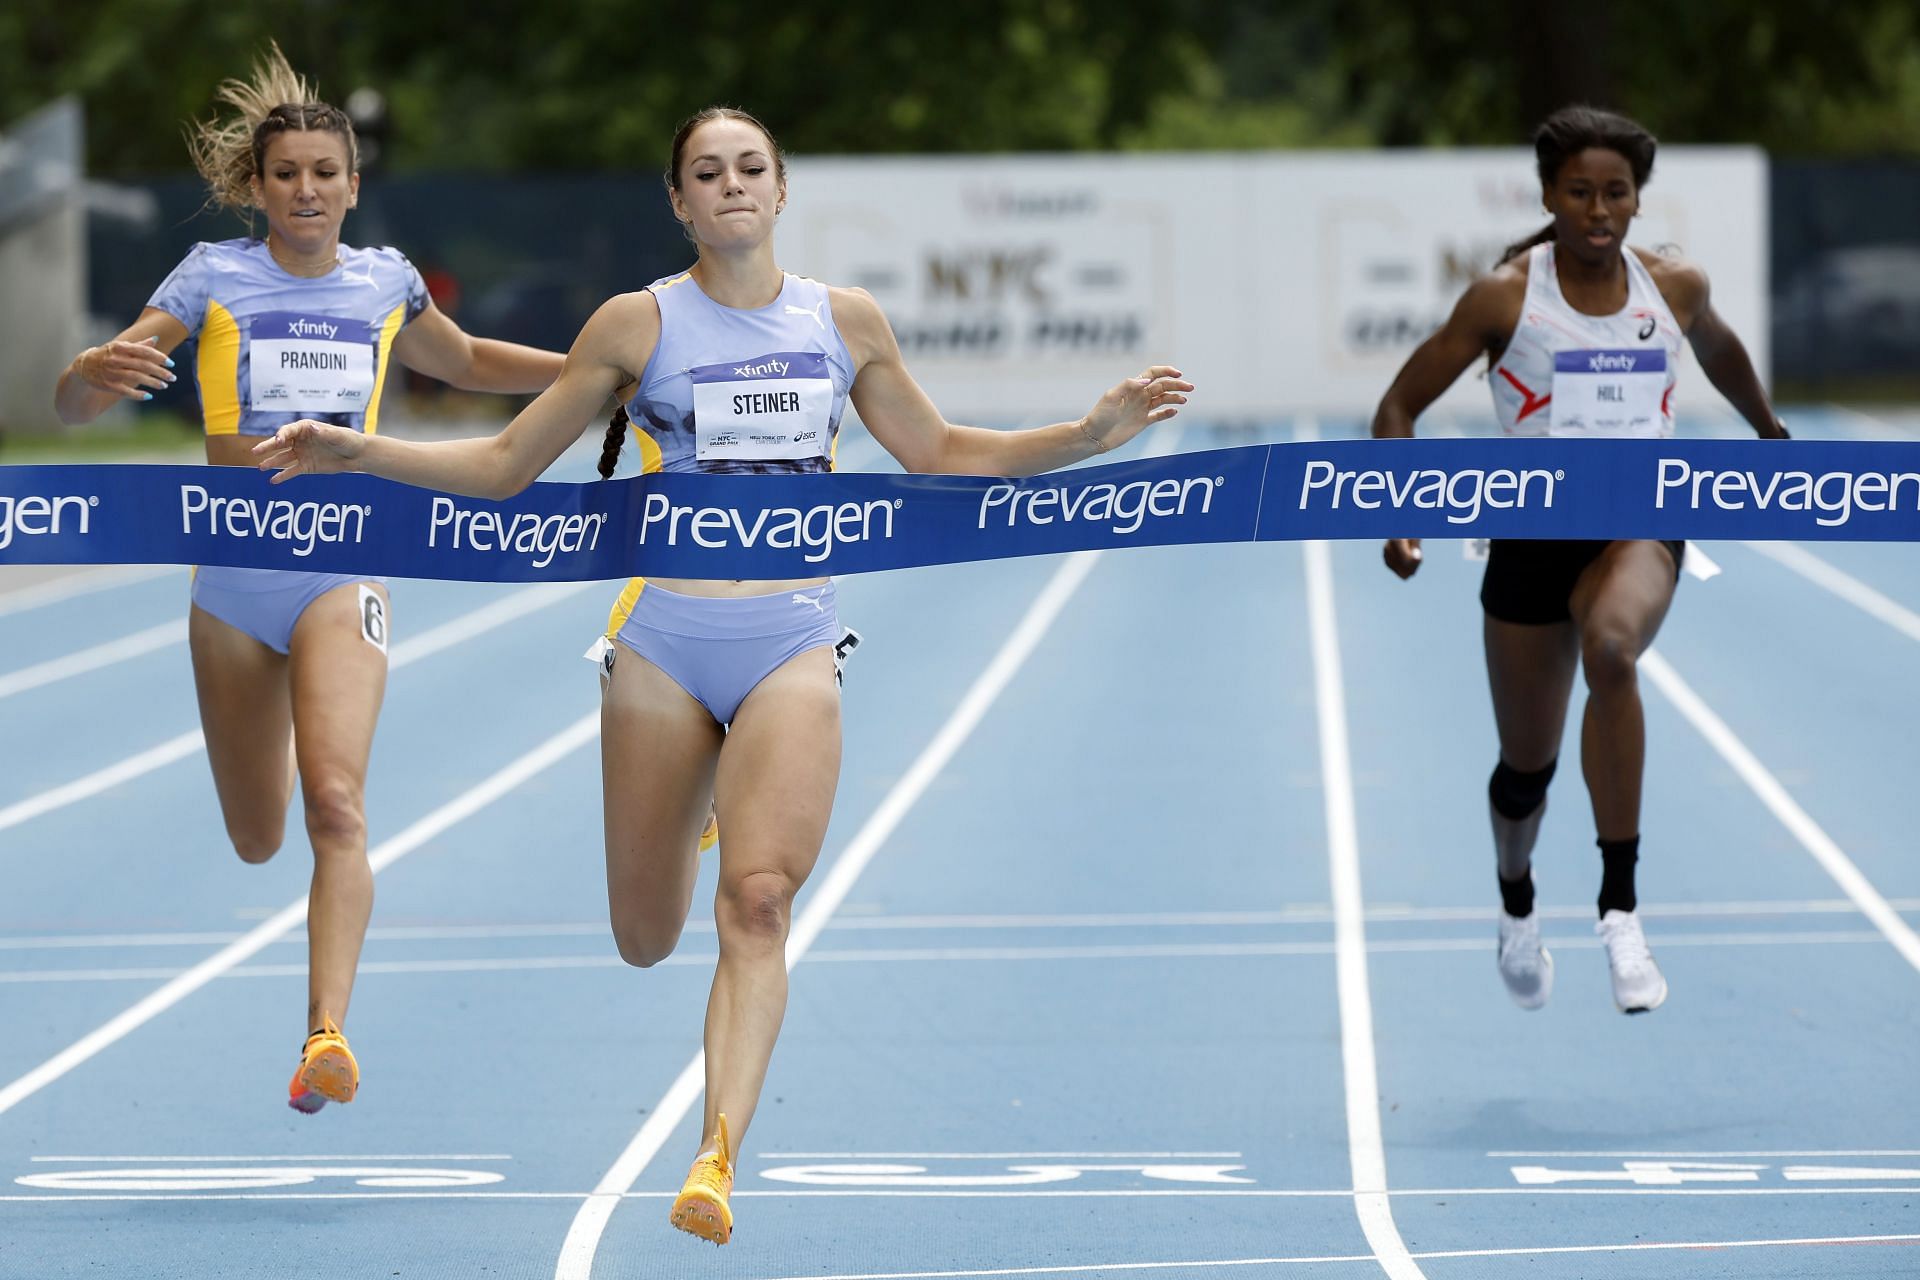 Abby Steiner (center) in action during the 2023 USATF NYC Grand Prix